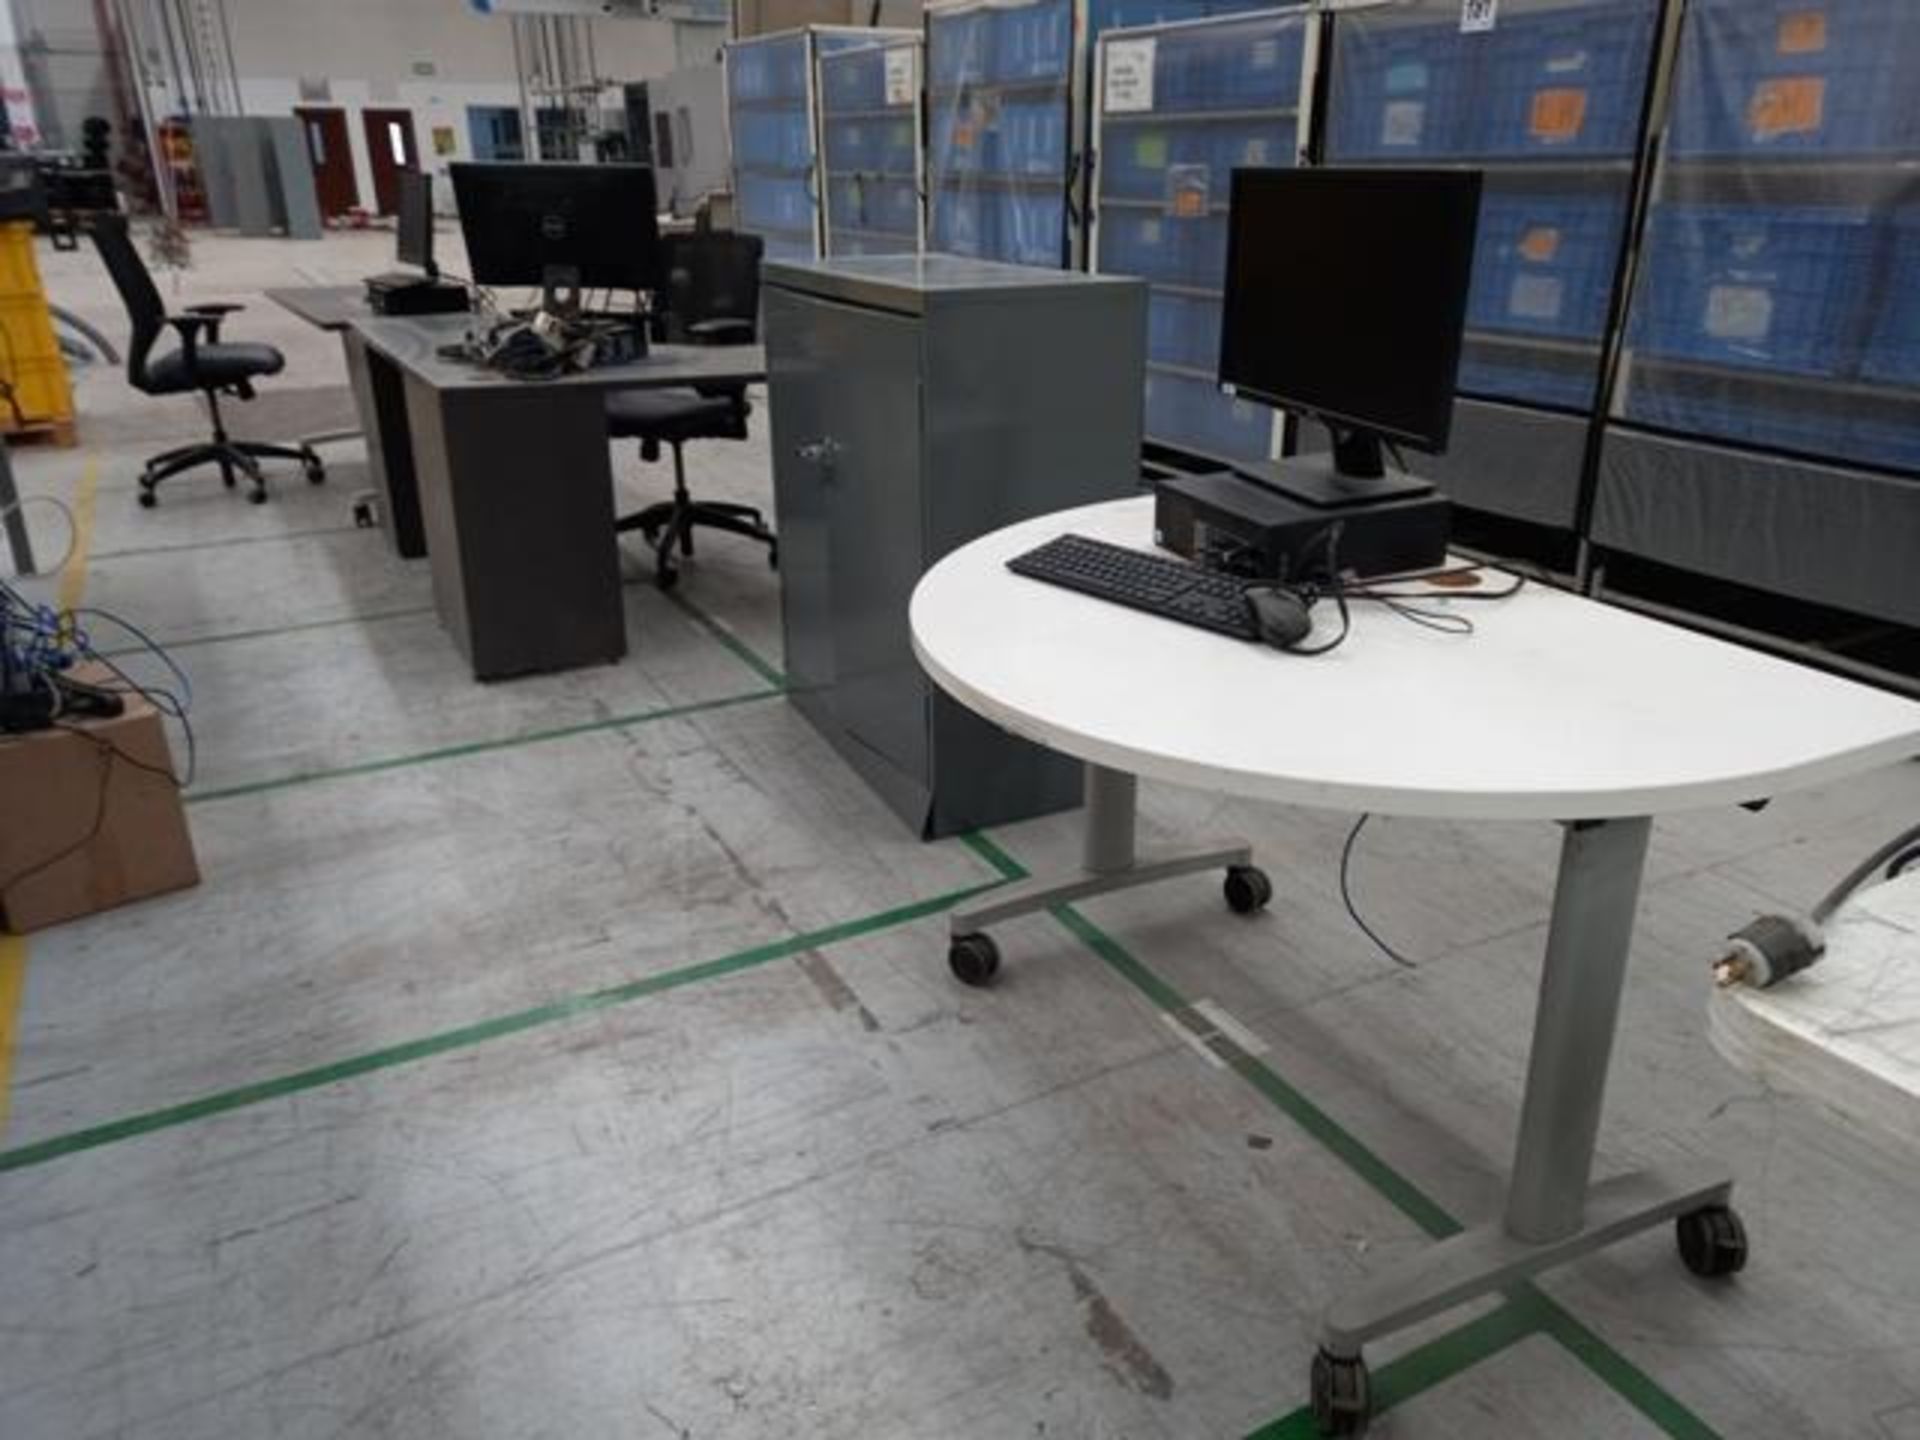 LOT: (66) Of Furniture and Computing Equipment Consisting of: Computers, Printers, Desks, Chairs, Dr - Image 27 of 38